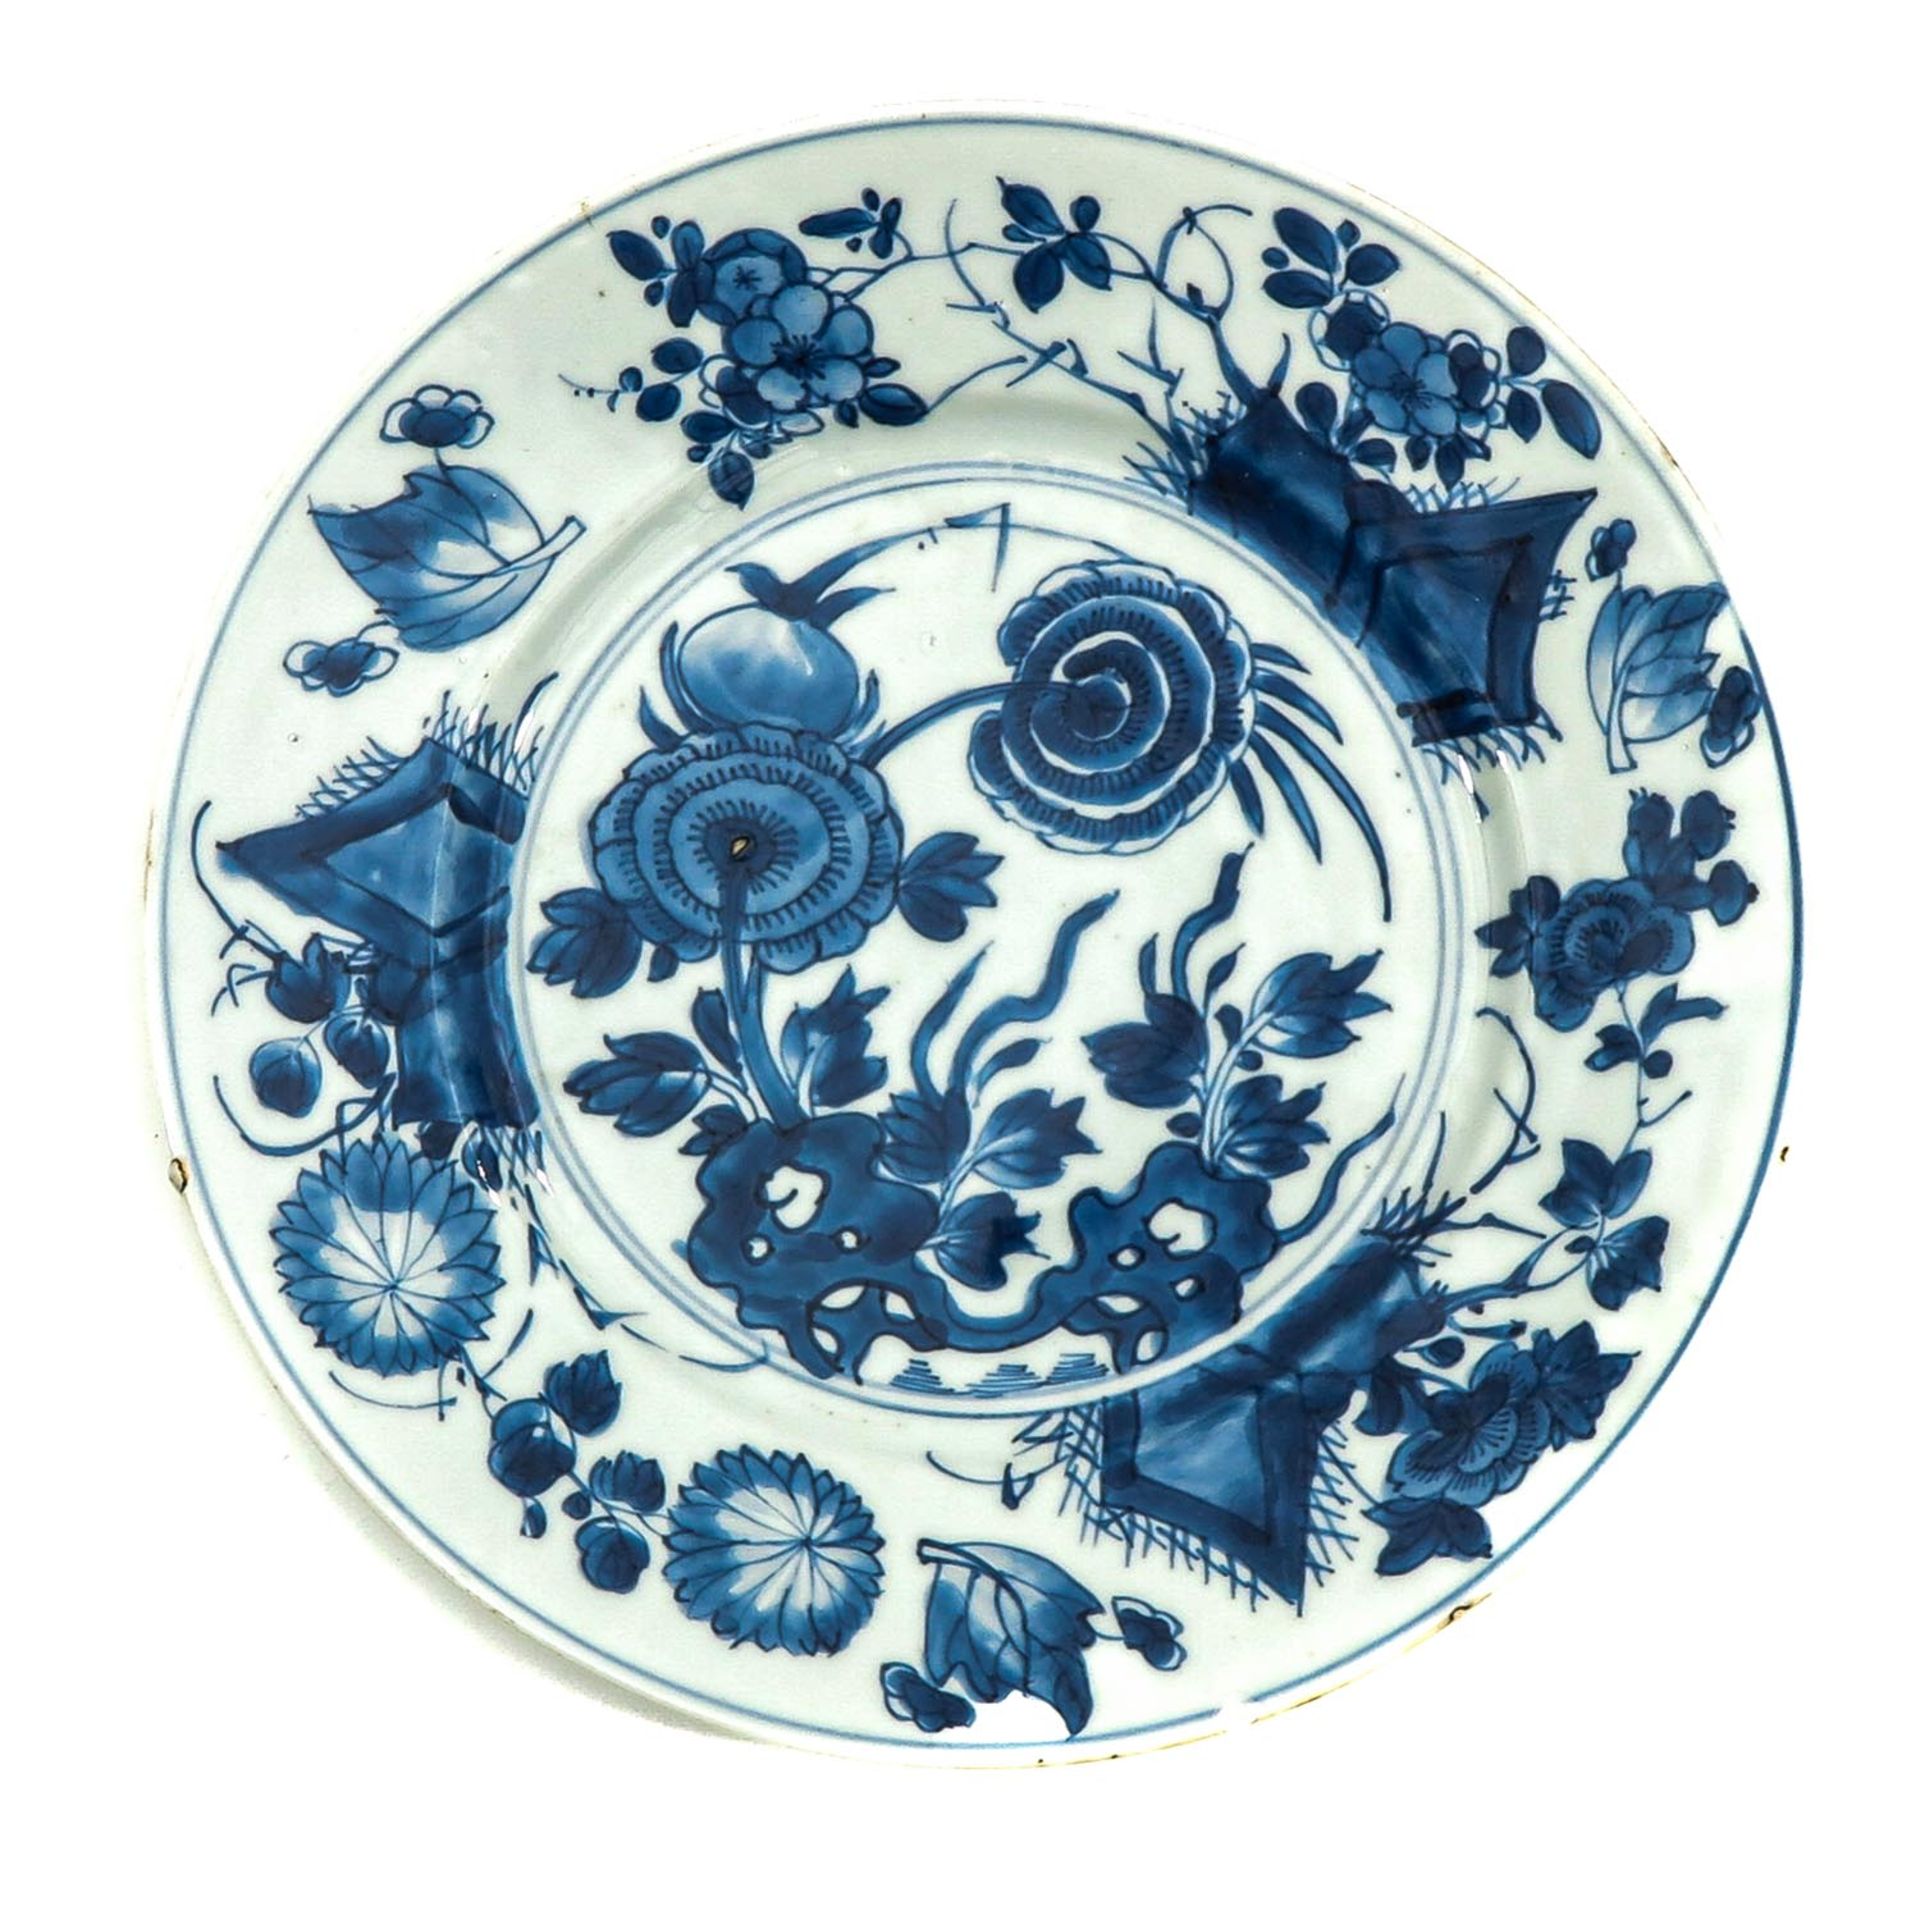 A Series of 5 Blue and White Plates - Bild 7 aus 10